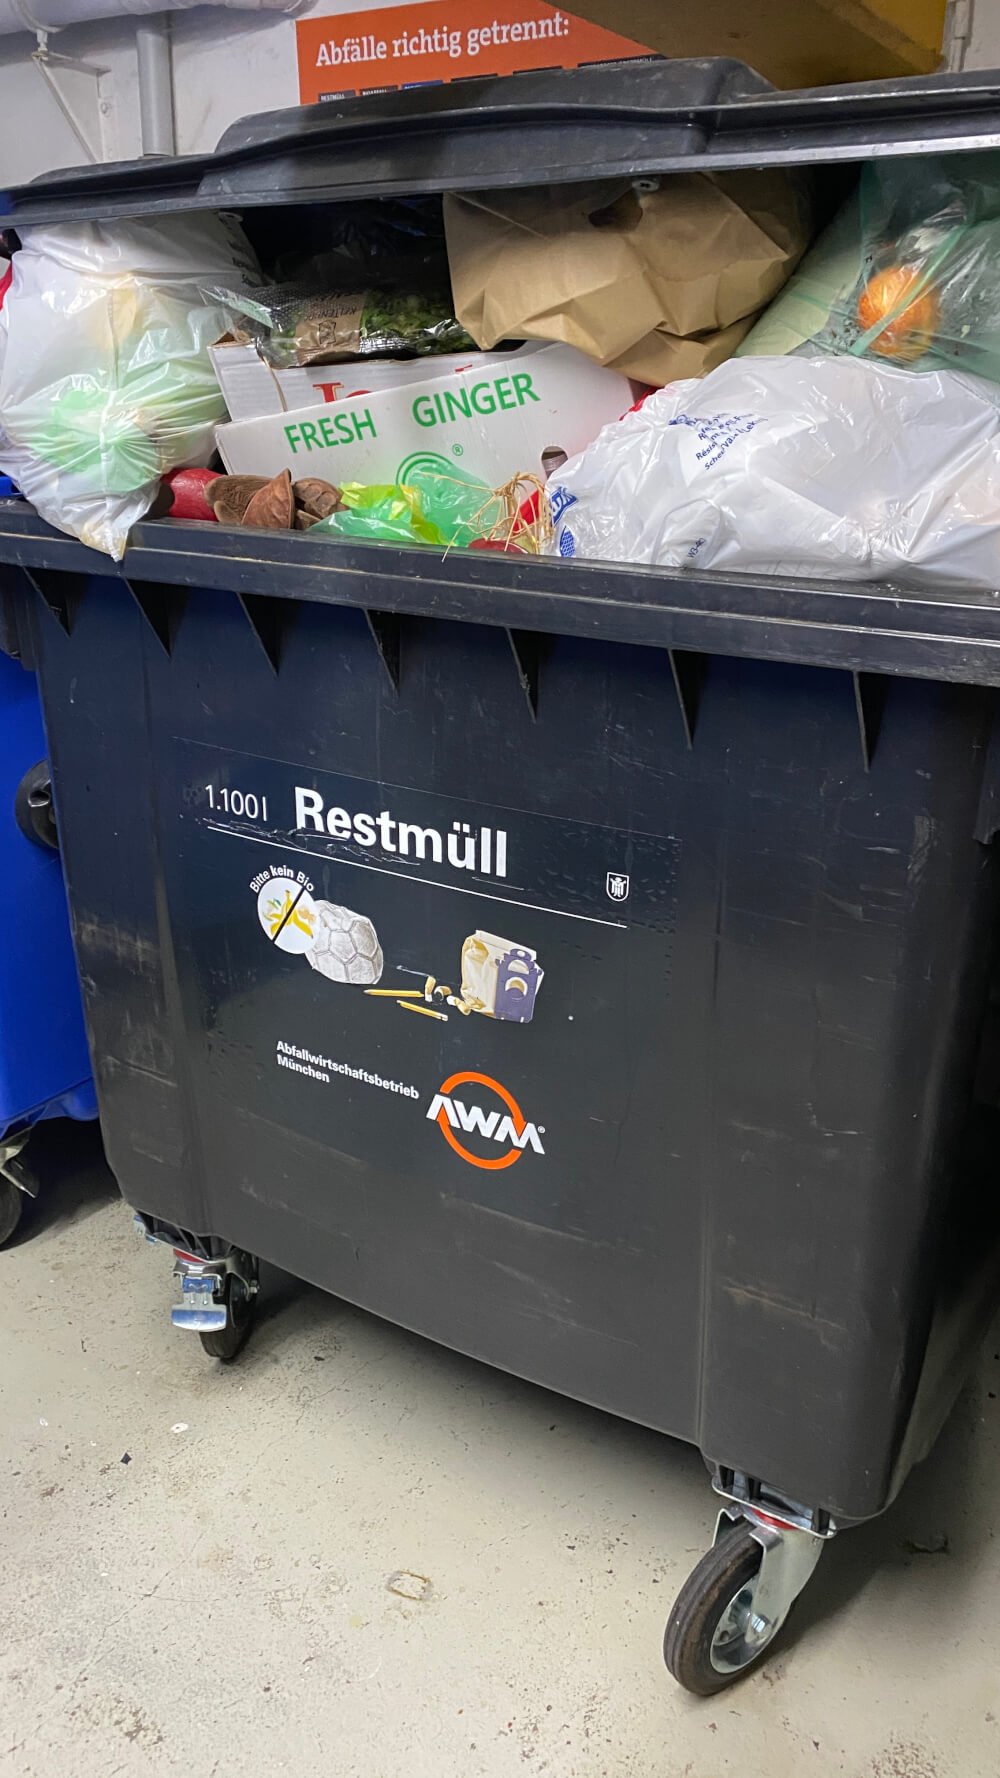 How to recycle in Munich